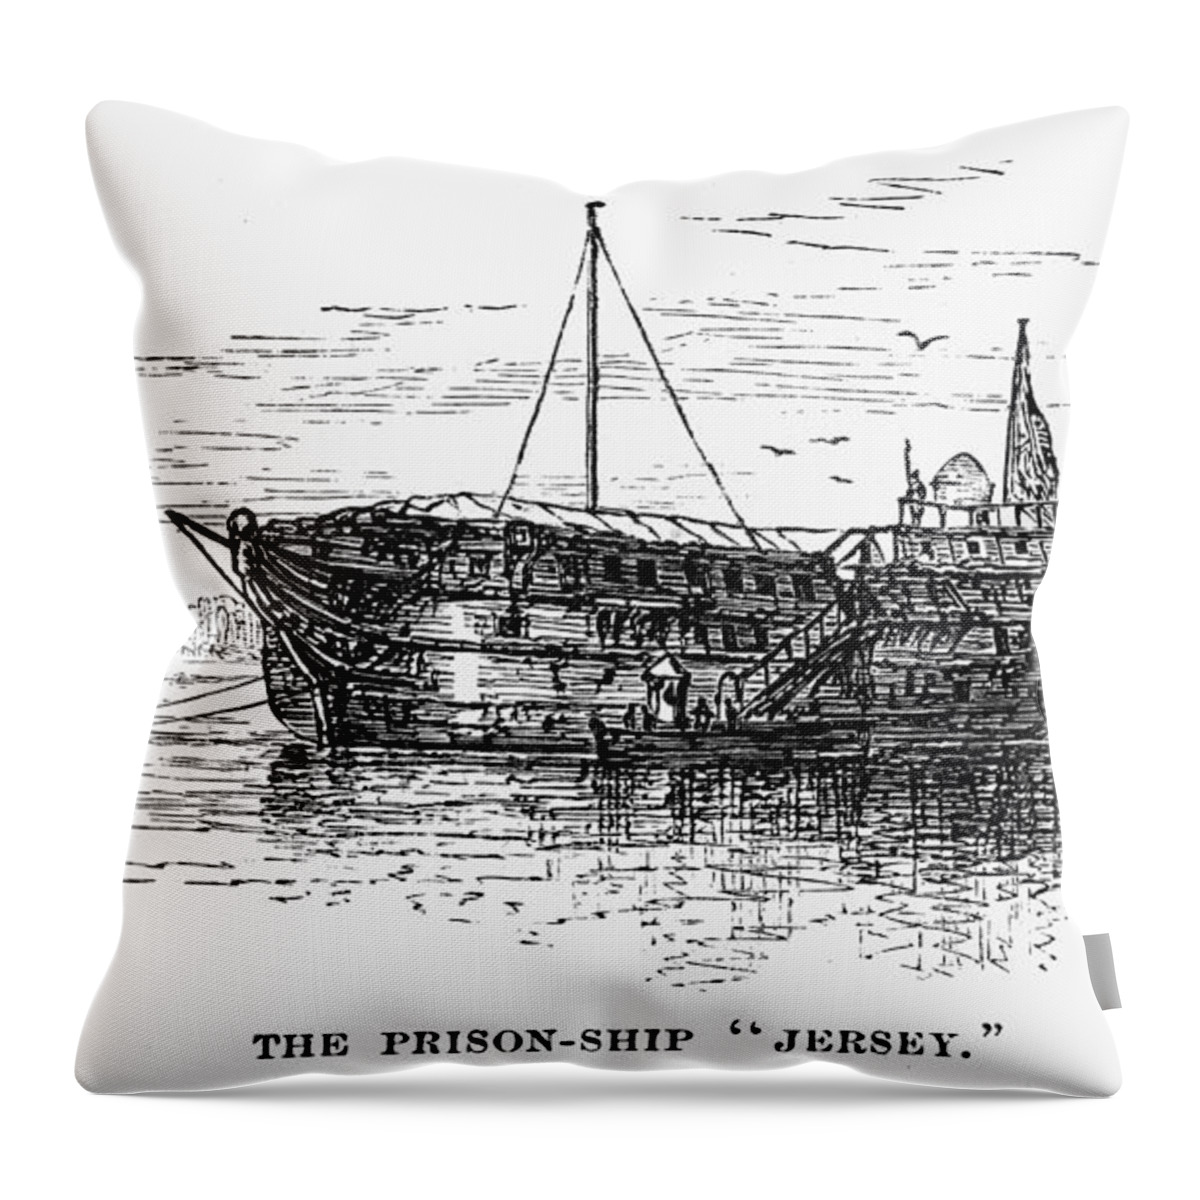 1770s Throw Pillow featuring the photograph BRITISH PRISON SHIP, 1770s by Granger